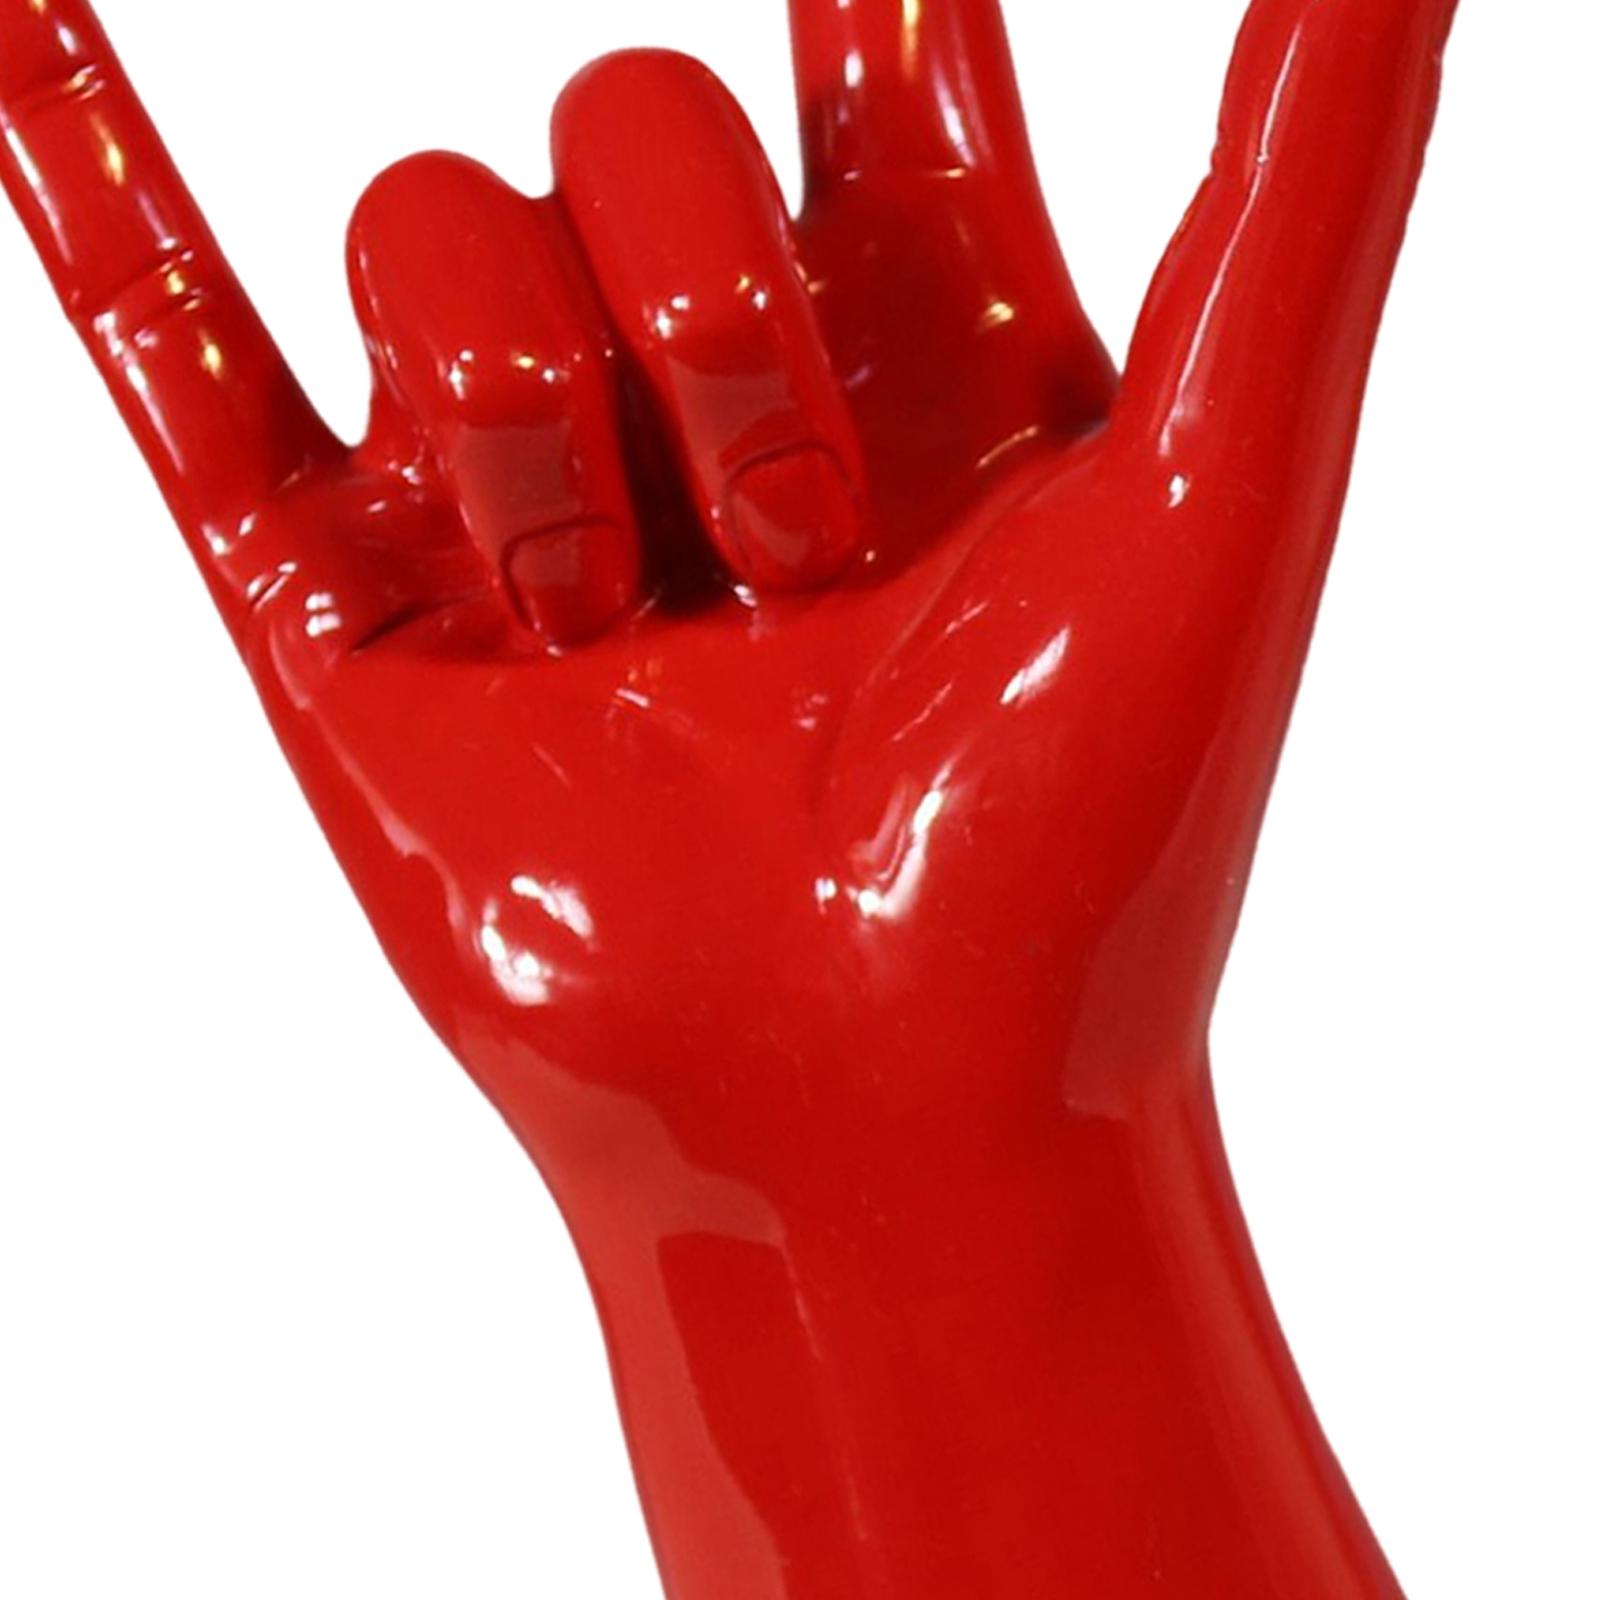 Rock Gesture Resin Statue Finger Sculpture Figurines Music Character Red